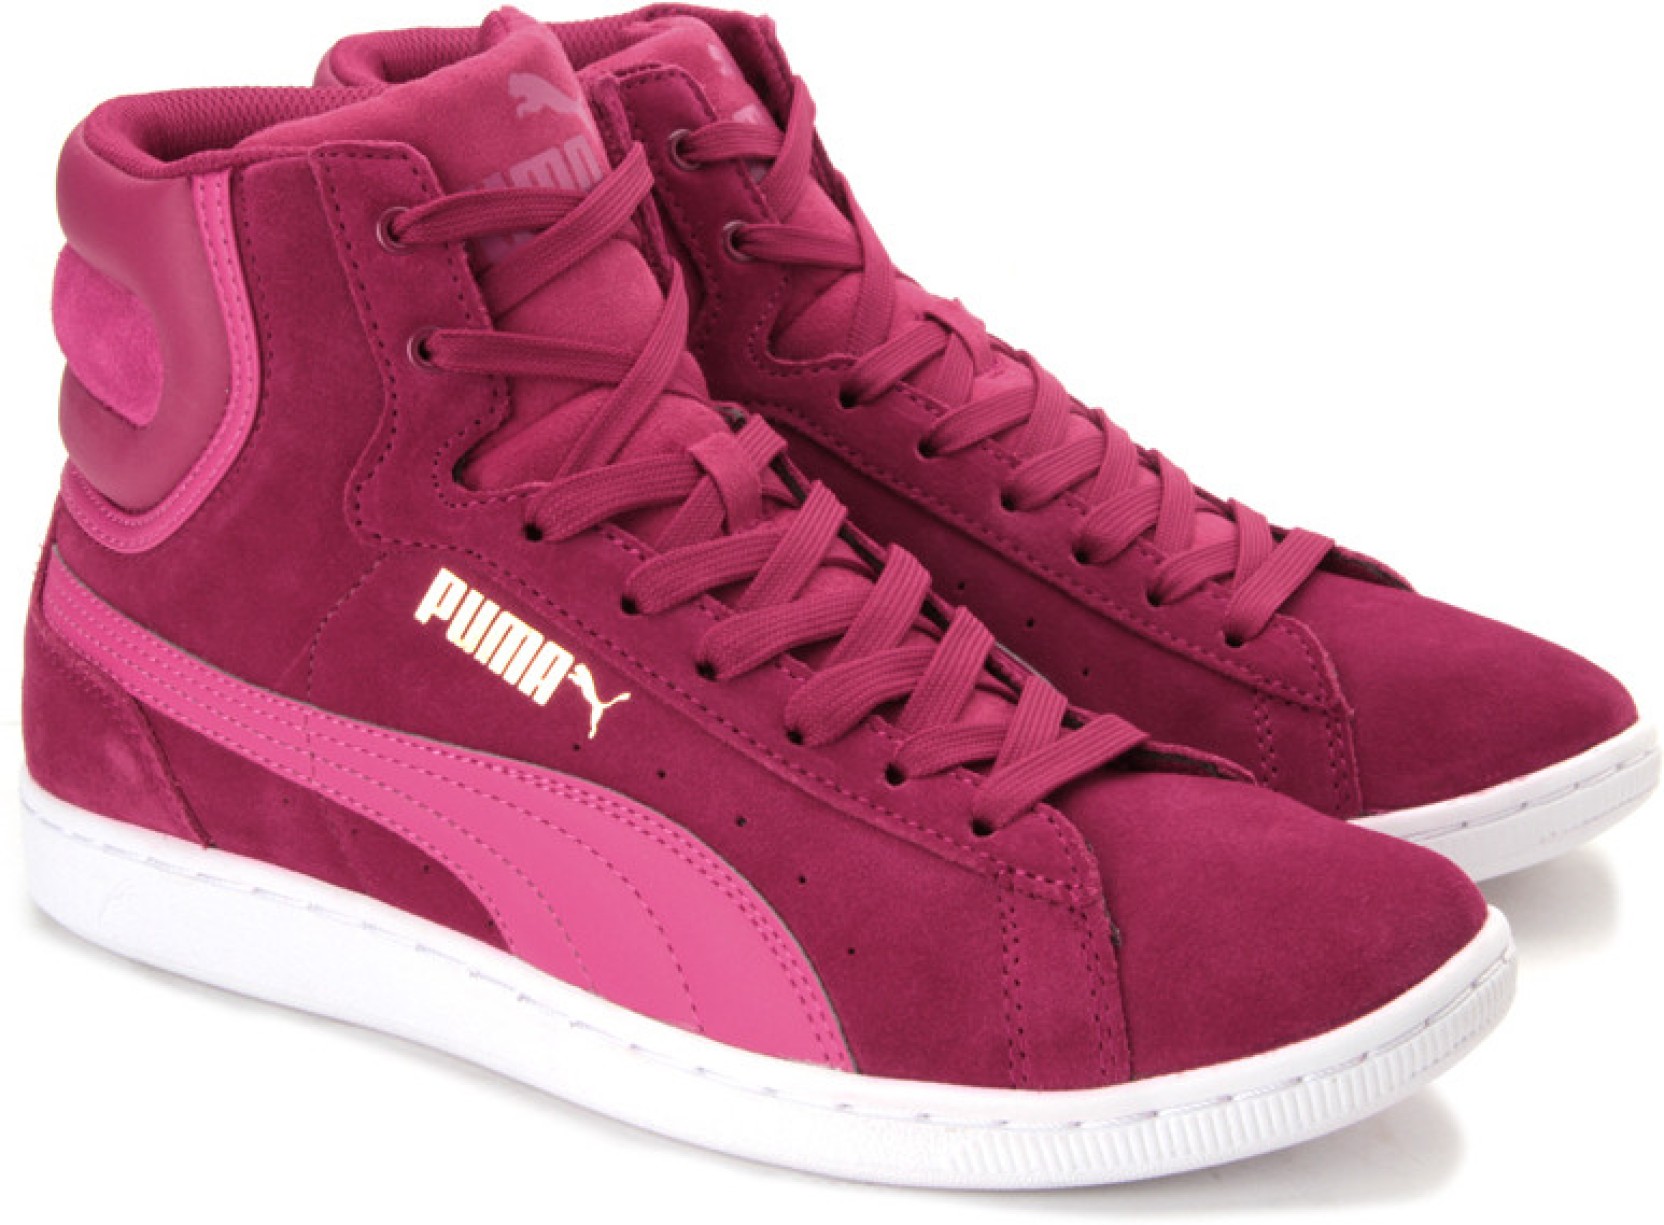 Puma Vikky Mid Wn'S Sneakers - Buy Cerise, Pink Color Puma Vikky Mid Wn ...